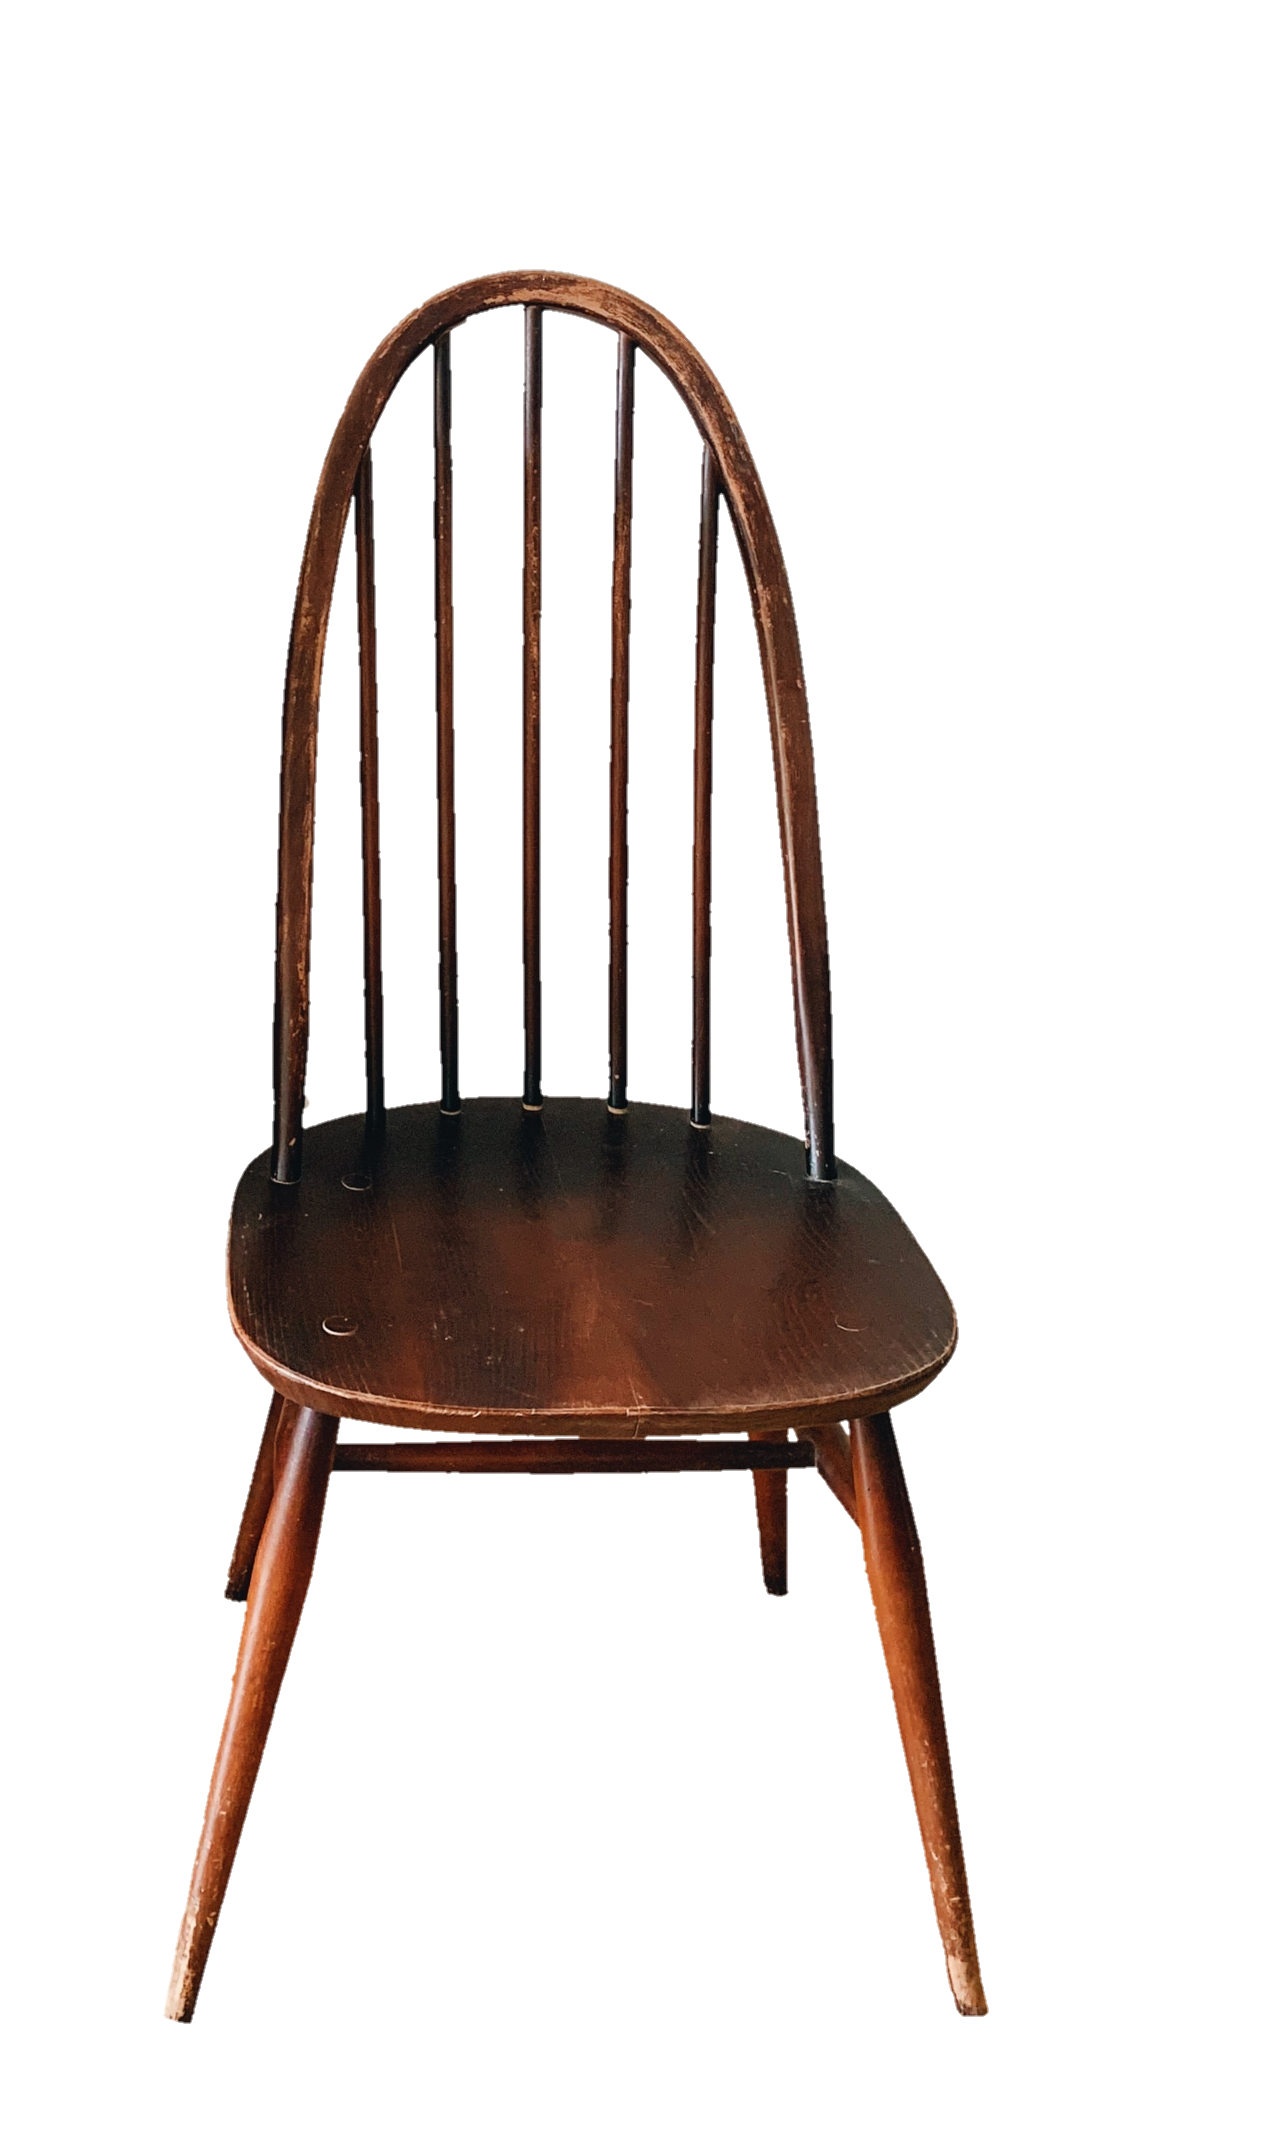 chair-png-image-pngfre-9